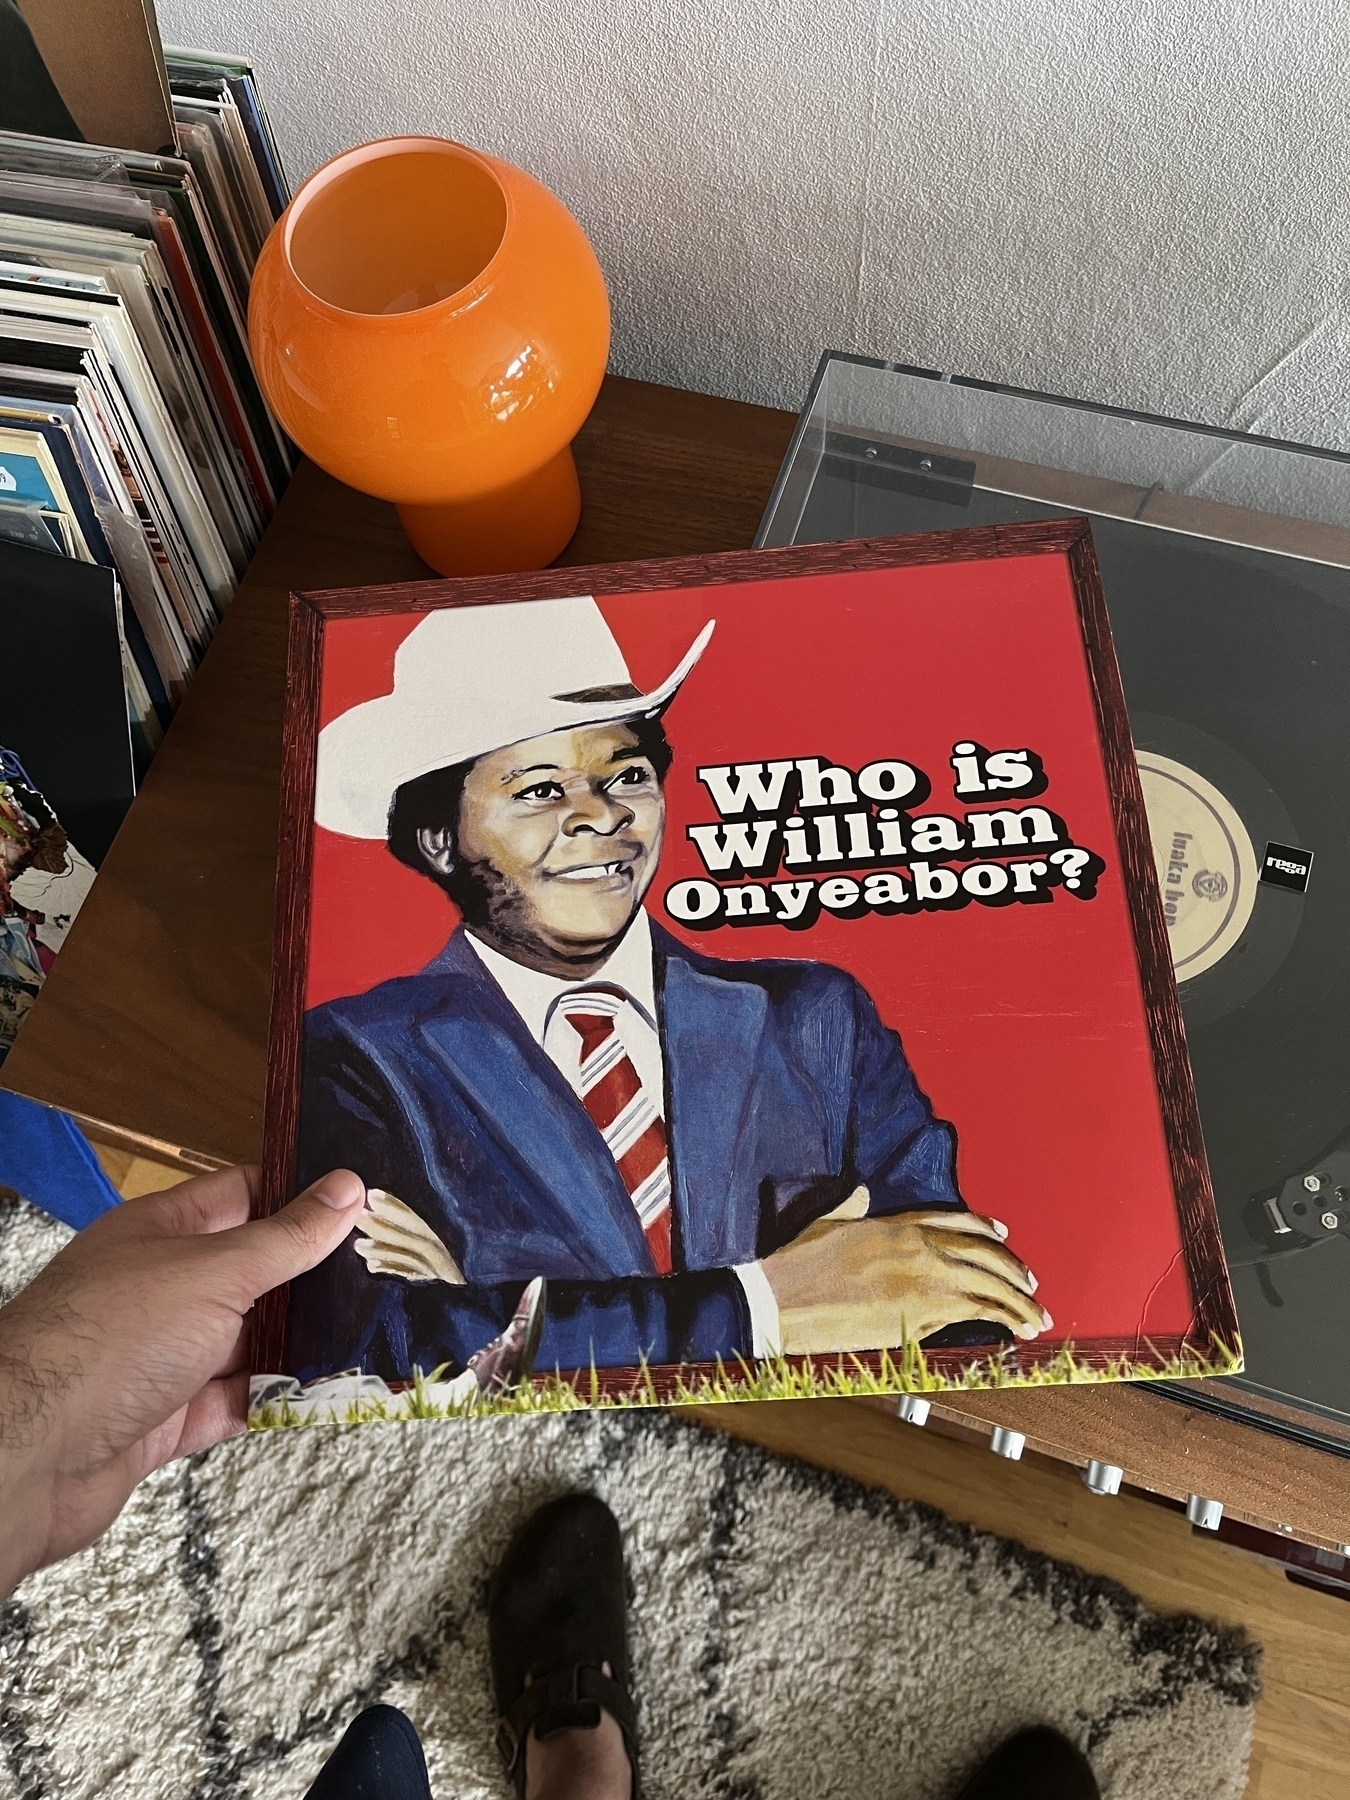 Record cover siting on top of a record player with a record moving, cover shows a Nigerian man wearing a white top hat.